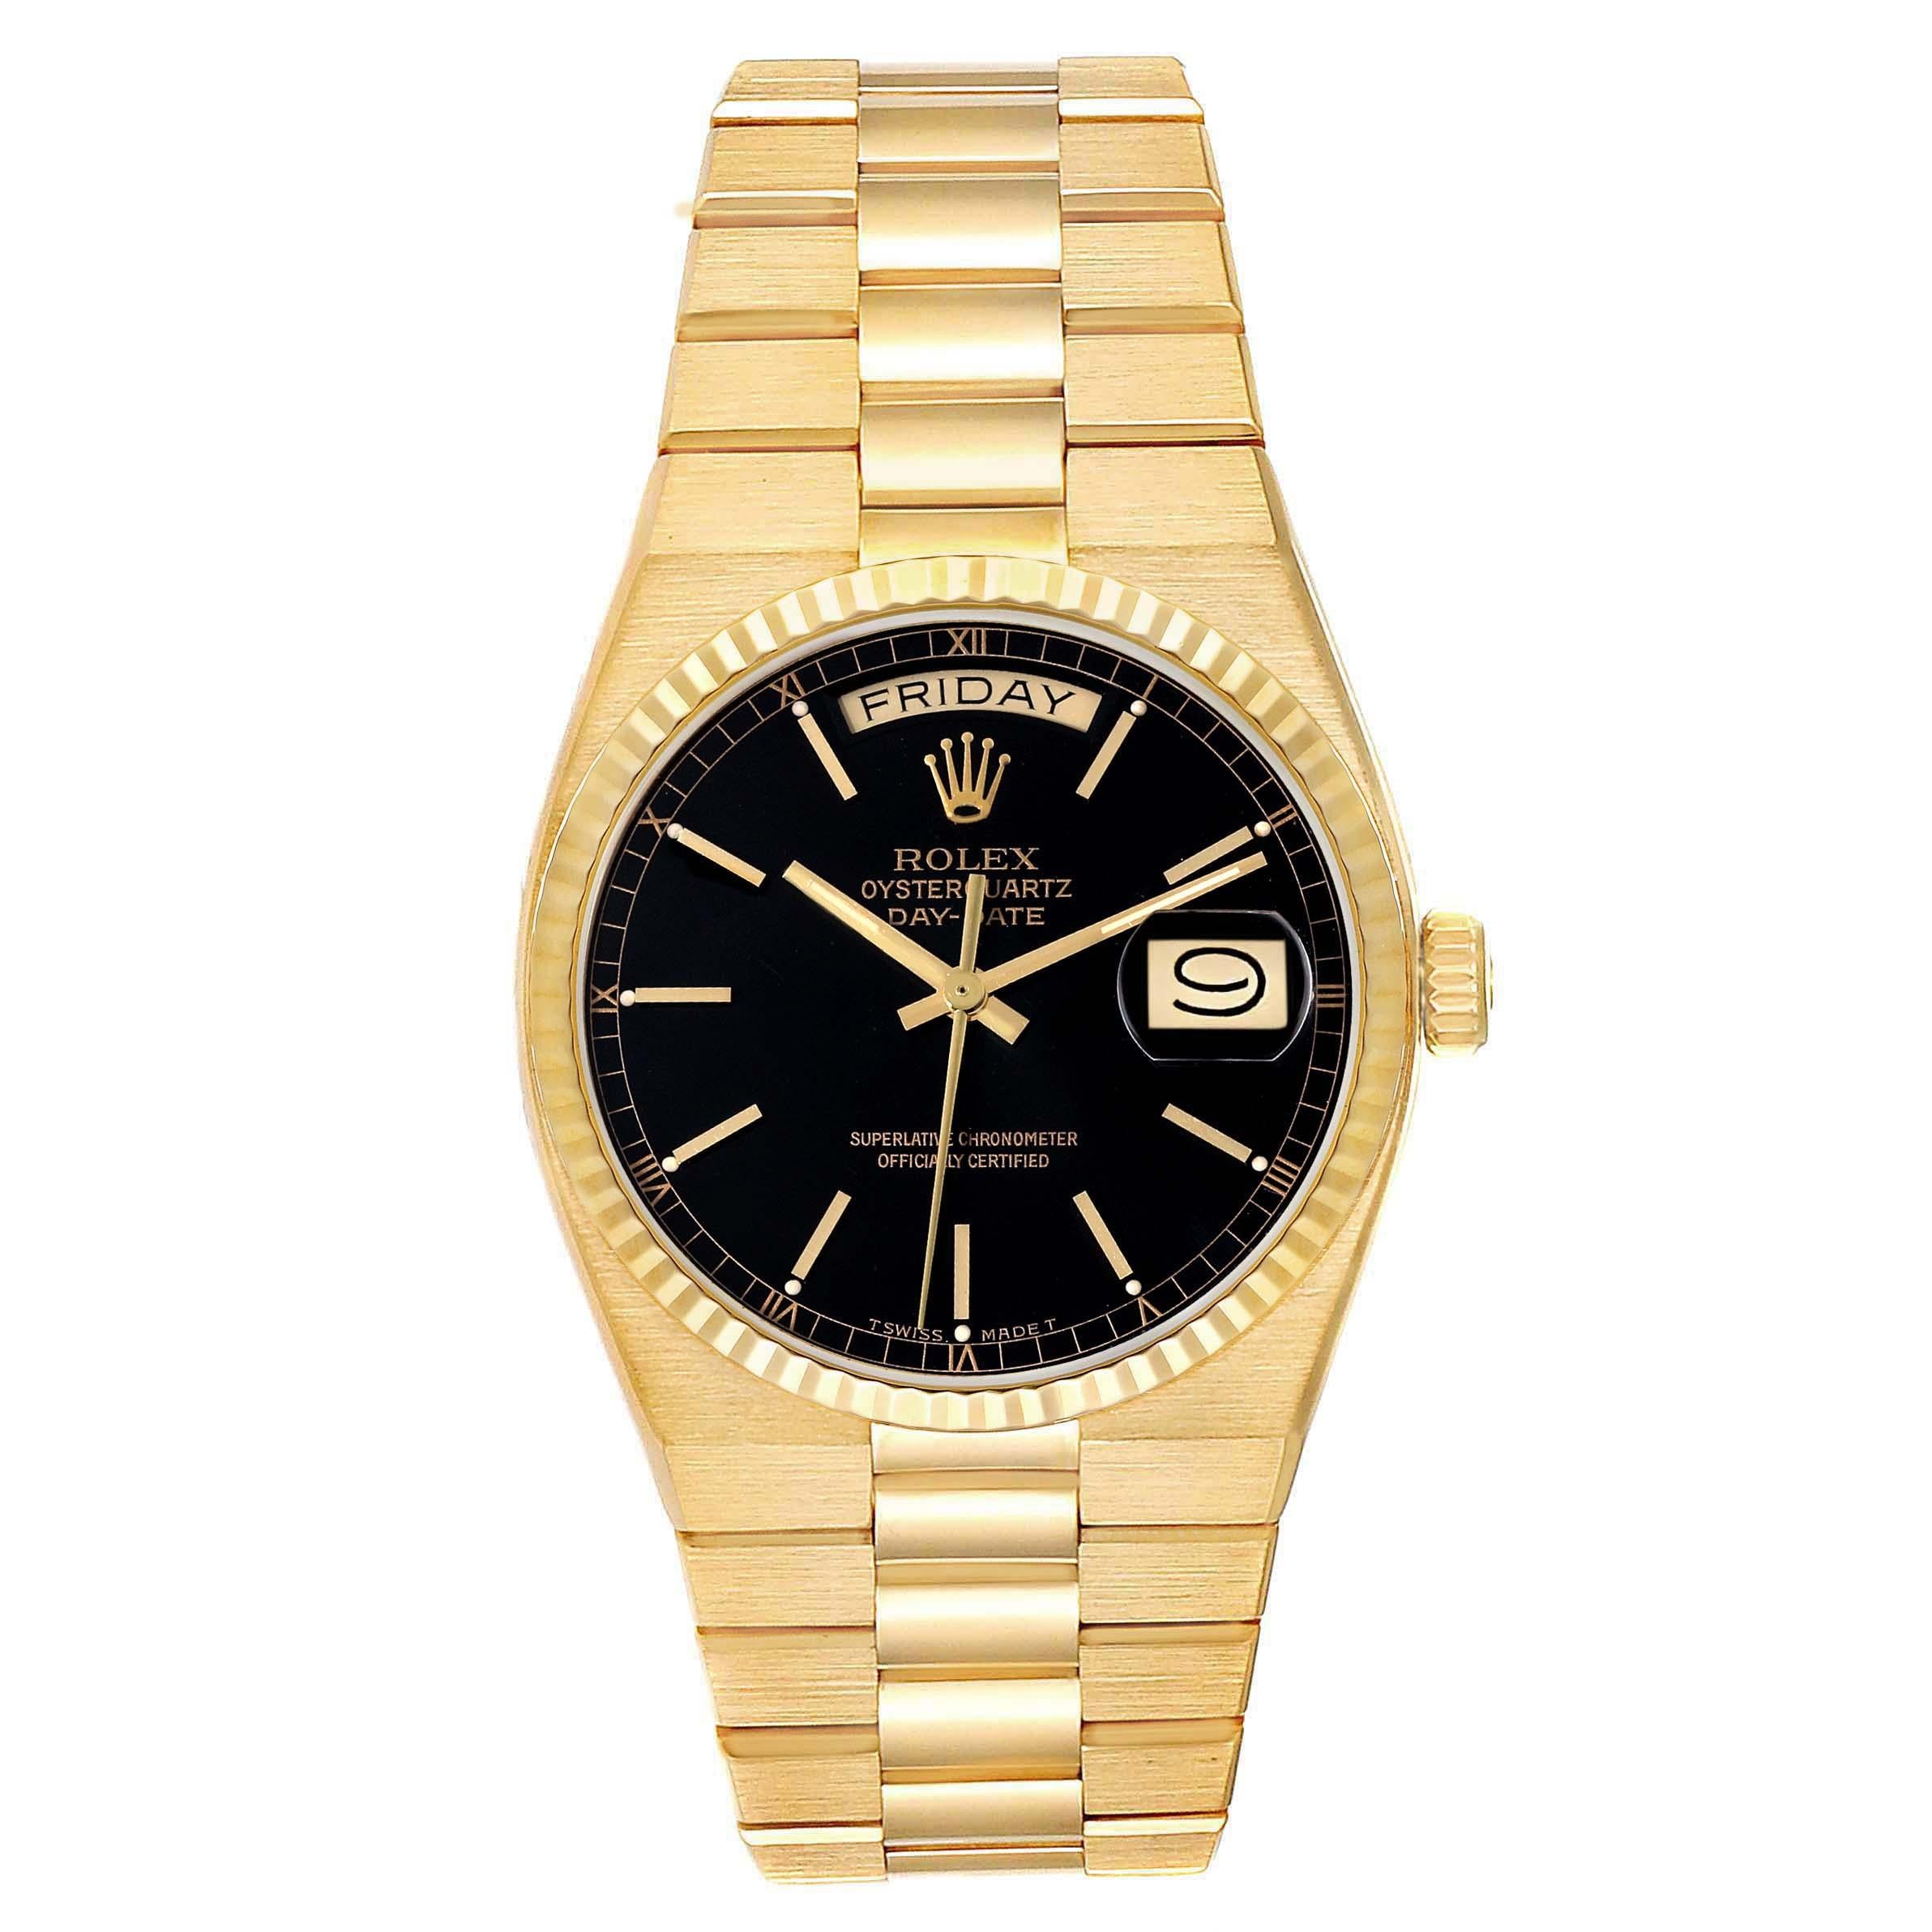 Rolex Oysterquartz President Day-Date Black Dial Yellow Gold Mens Watch 19018. Quartz movement. 18K yellow gold oyster case 36.0 mm in diameter. Rolex logo on a crown. 18k yellow gold fluted bezel. Scratch resistant sapphire crystal with cyclops